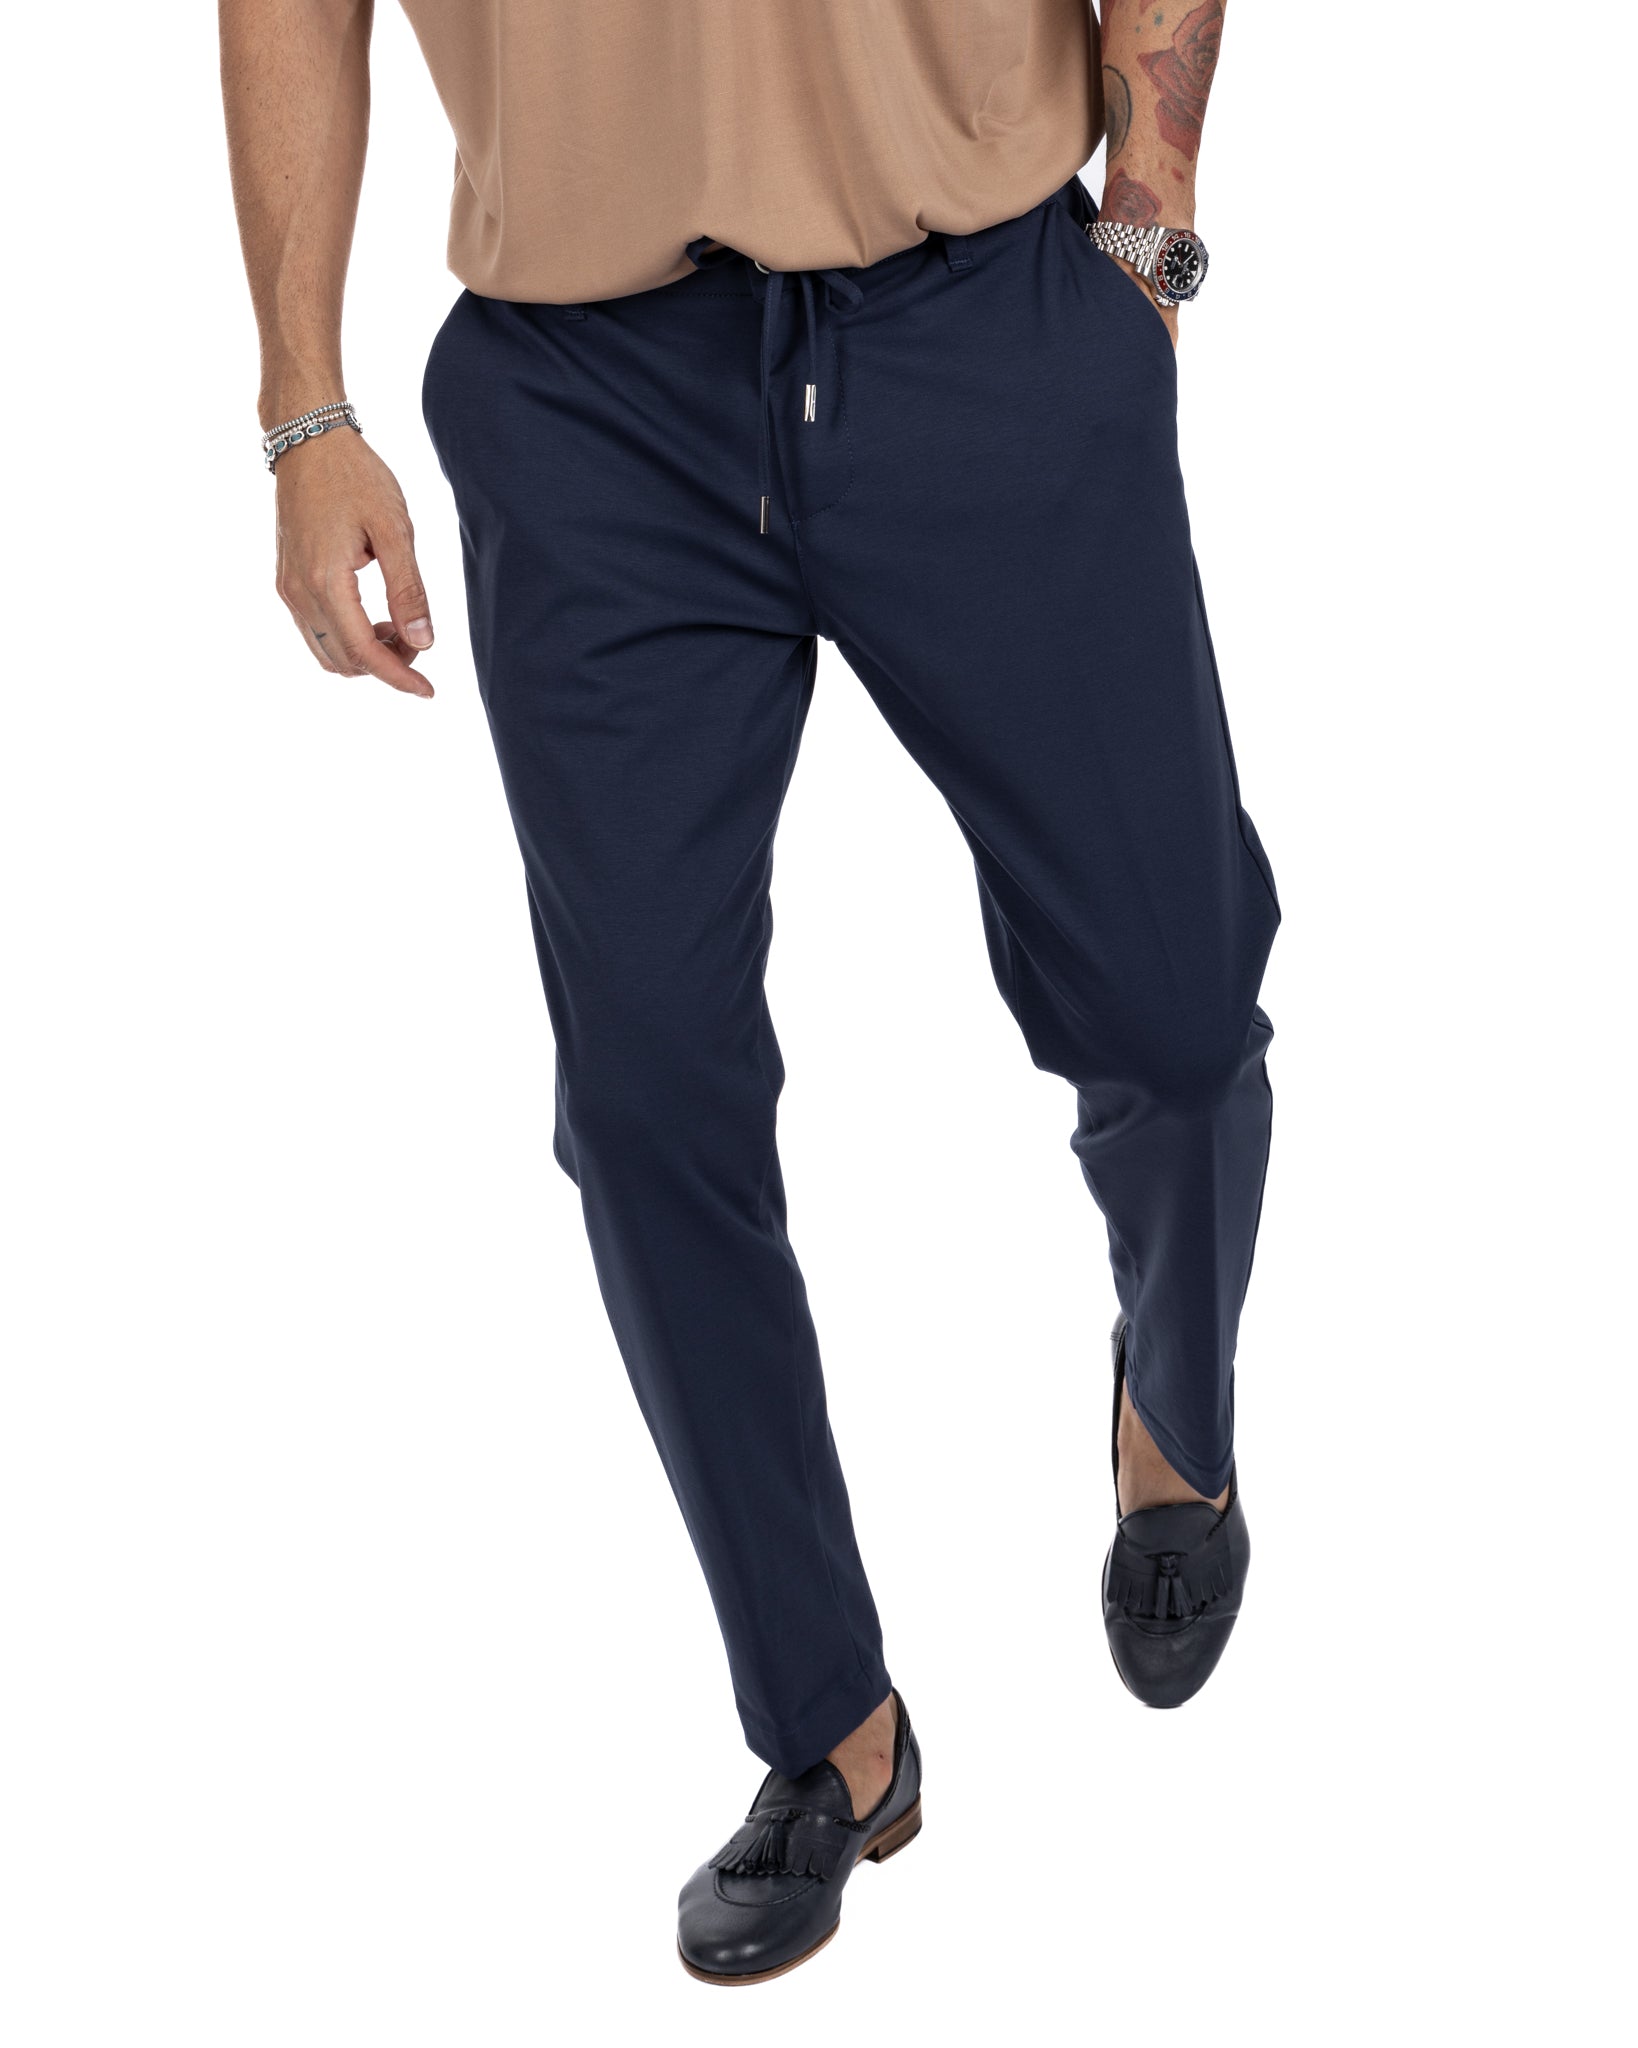 Shelby - blue cotton trousers